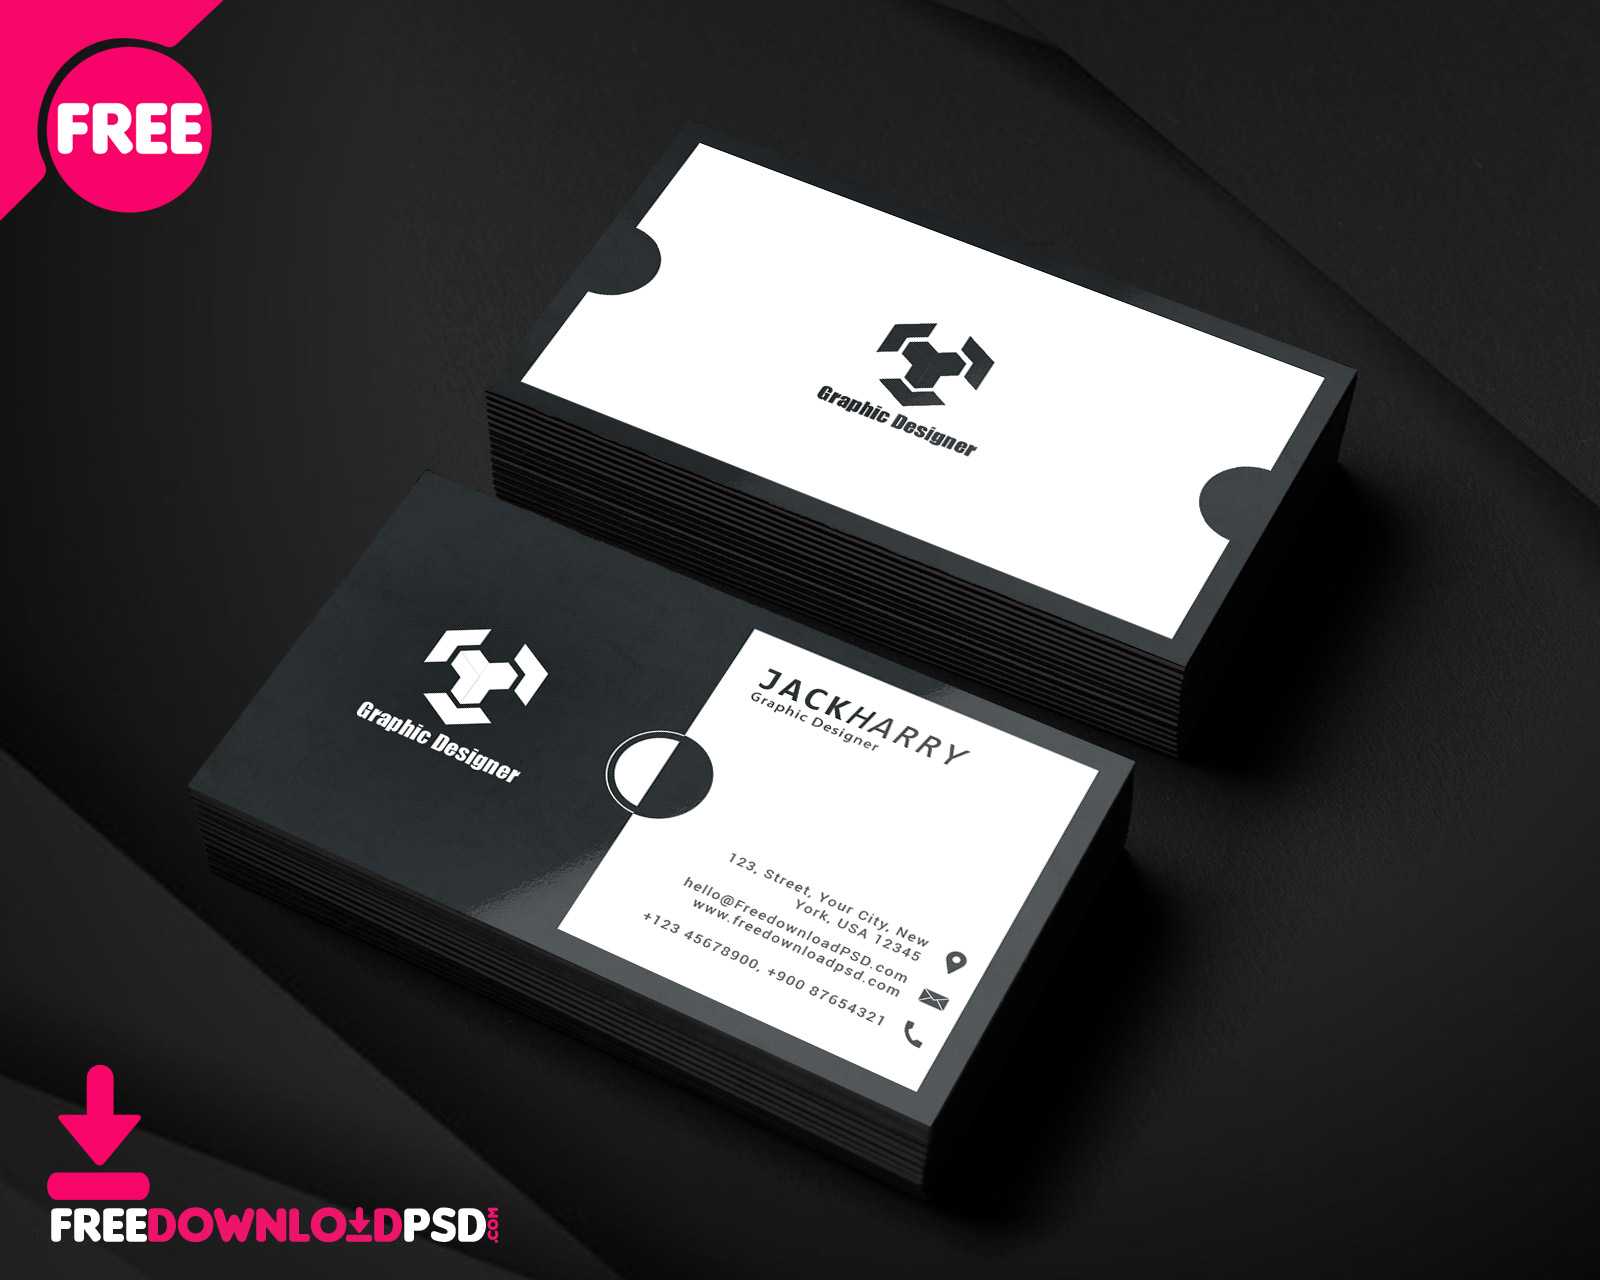 Modern Graphic Designer Business Card Psd Template For Templates For Visiting Cards Free Downloads